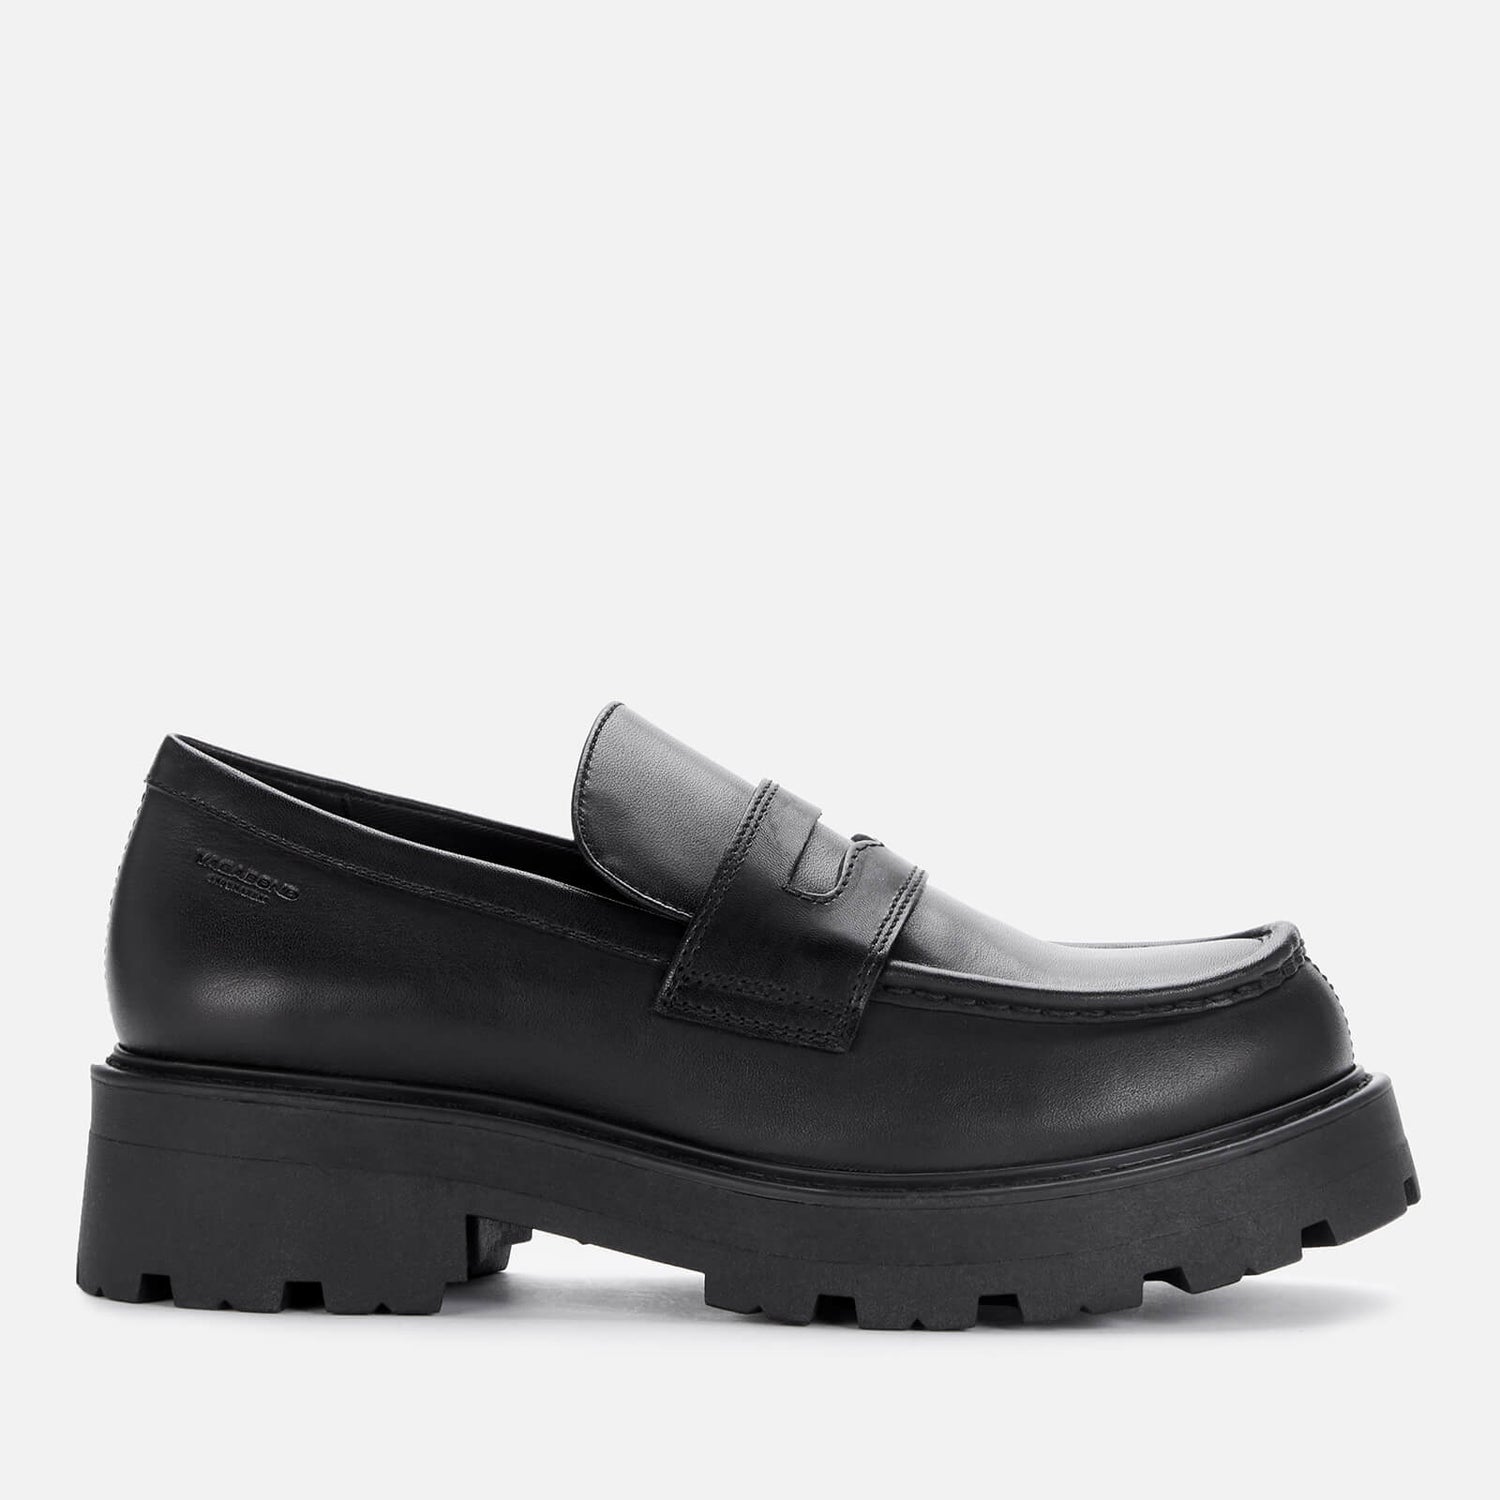 Vagabond Women's Cosmo 2.0 Leather Loafers - Black - UK 6